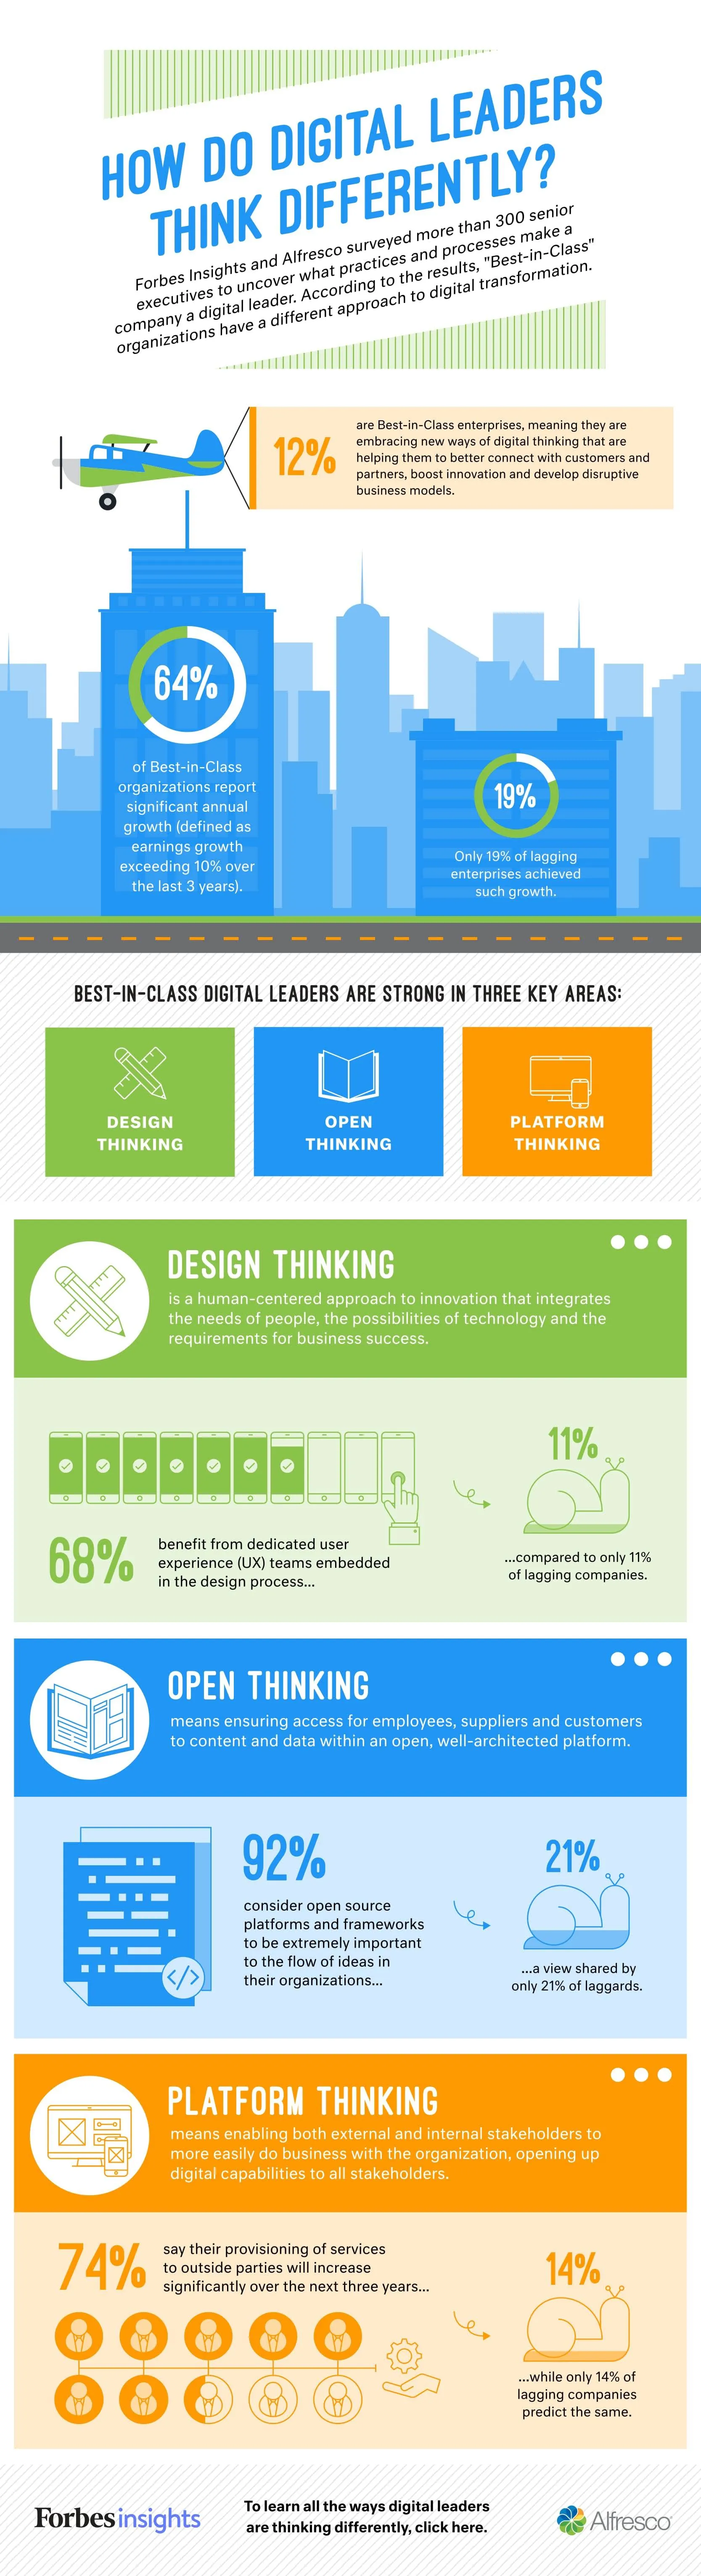 Why Successful Digital Leaders Think Differently – Infographic